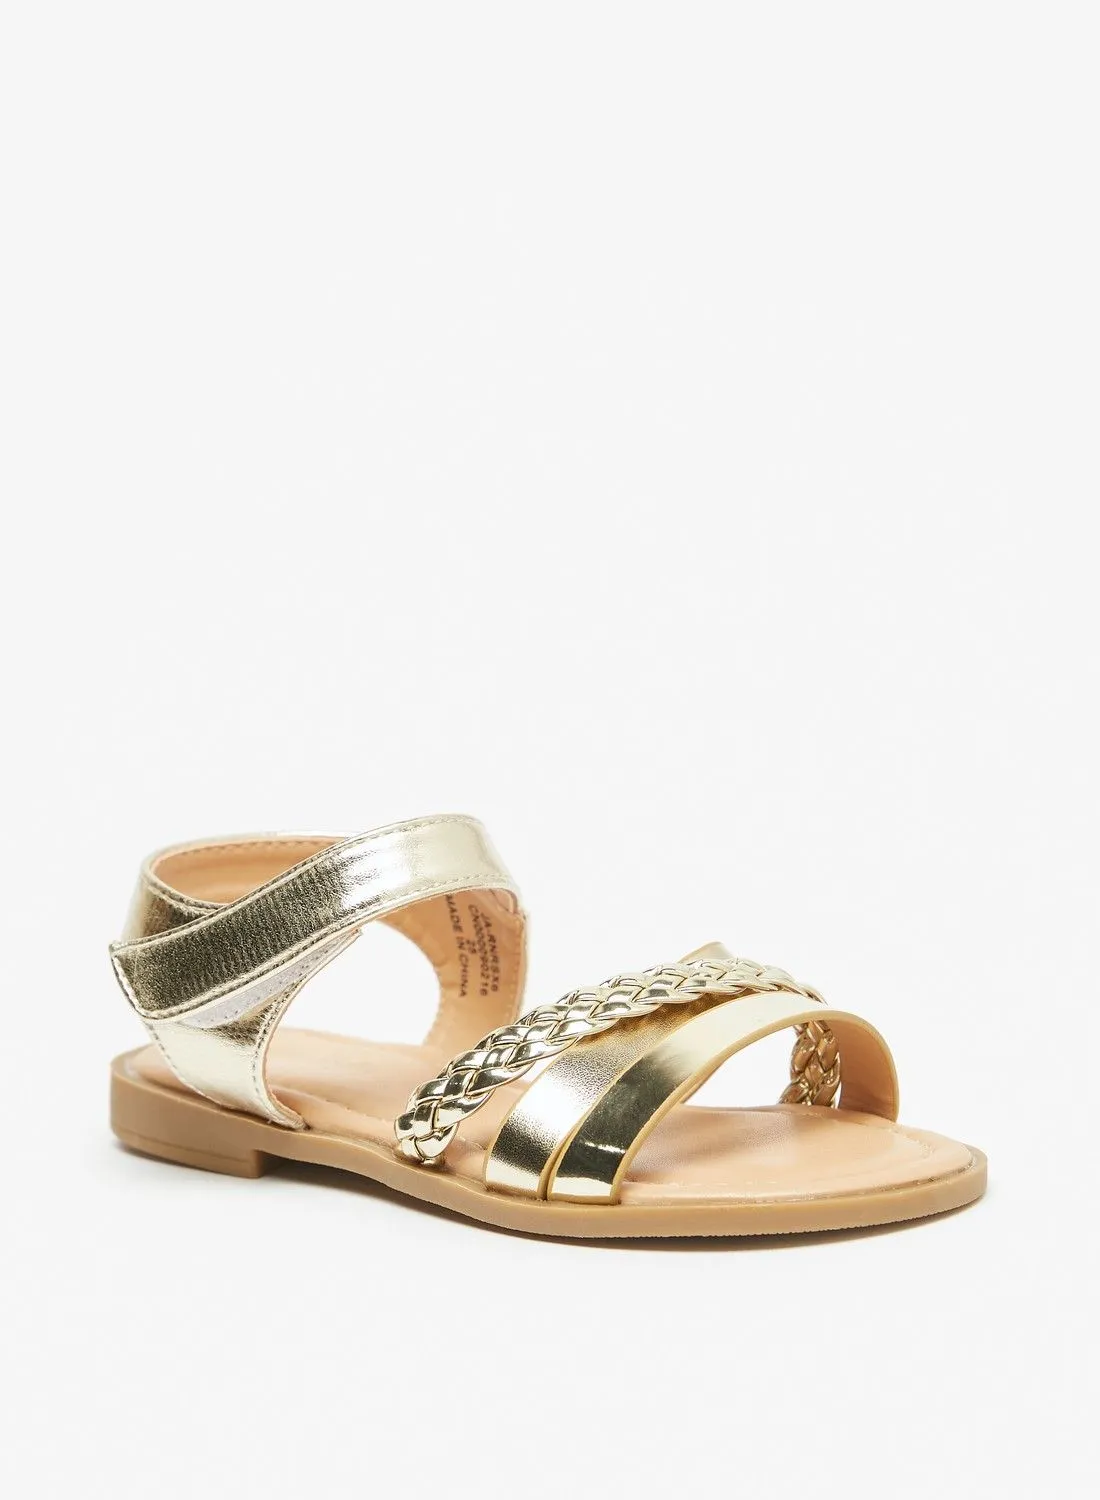 Flora Bella Braided Cross Strap Sandals with Hook and Loop Closure